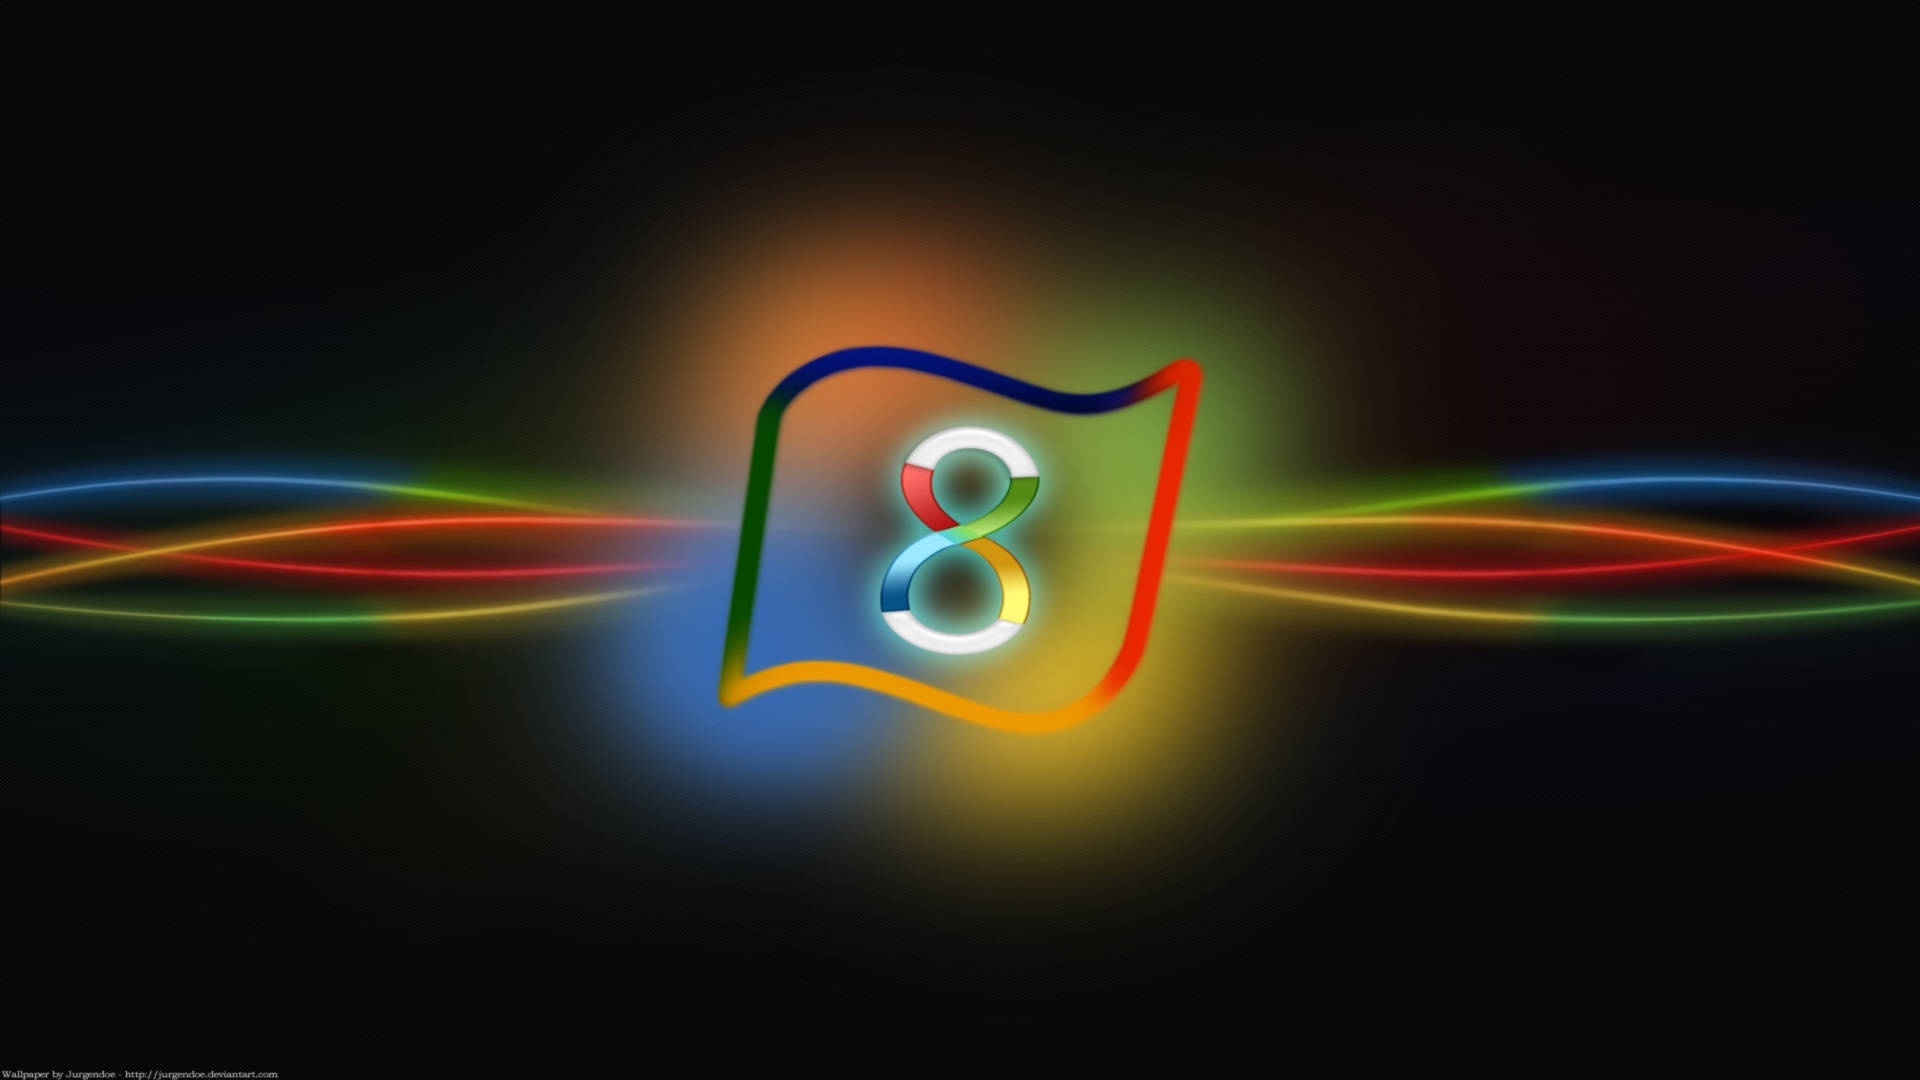 Colorful Windows 8 Logo Graphic Background